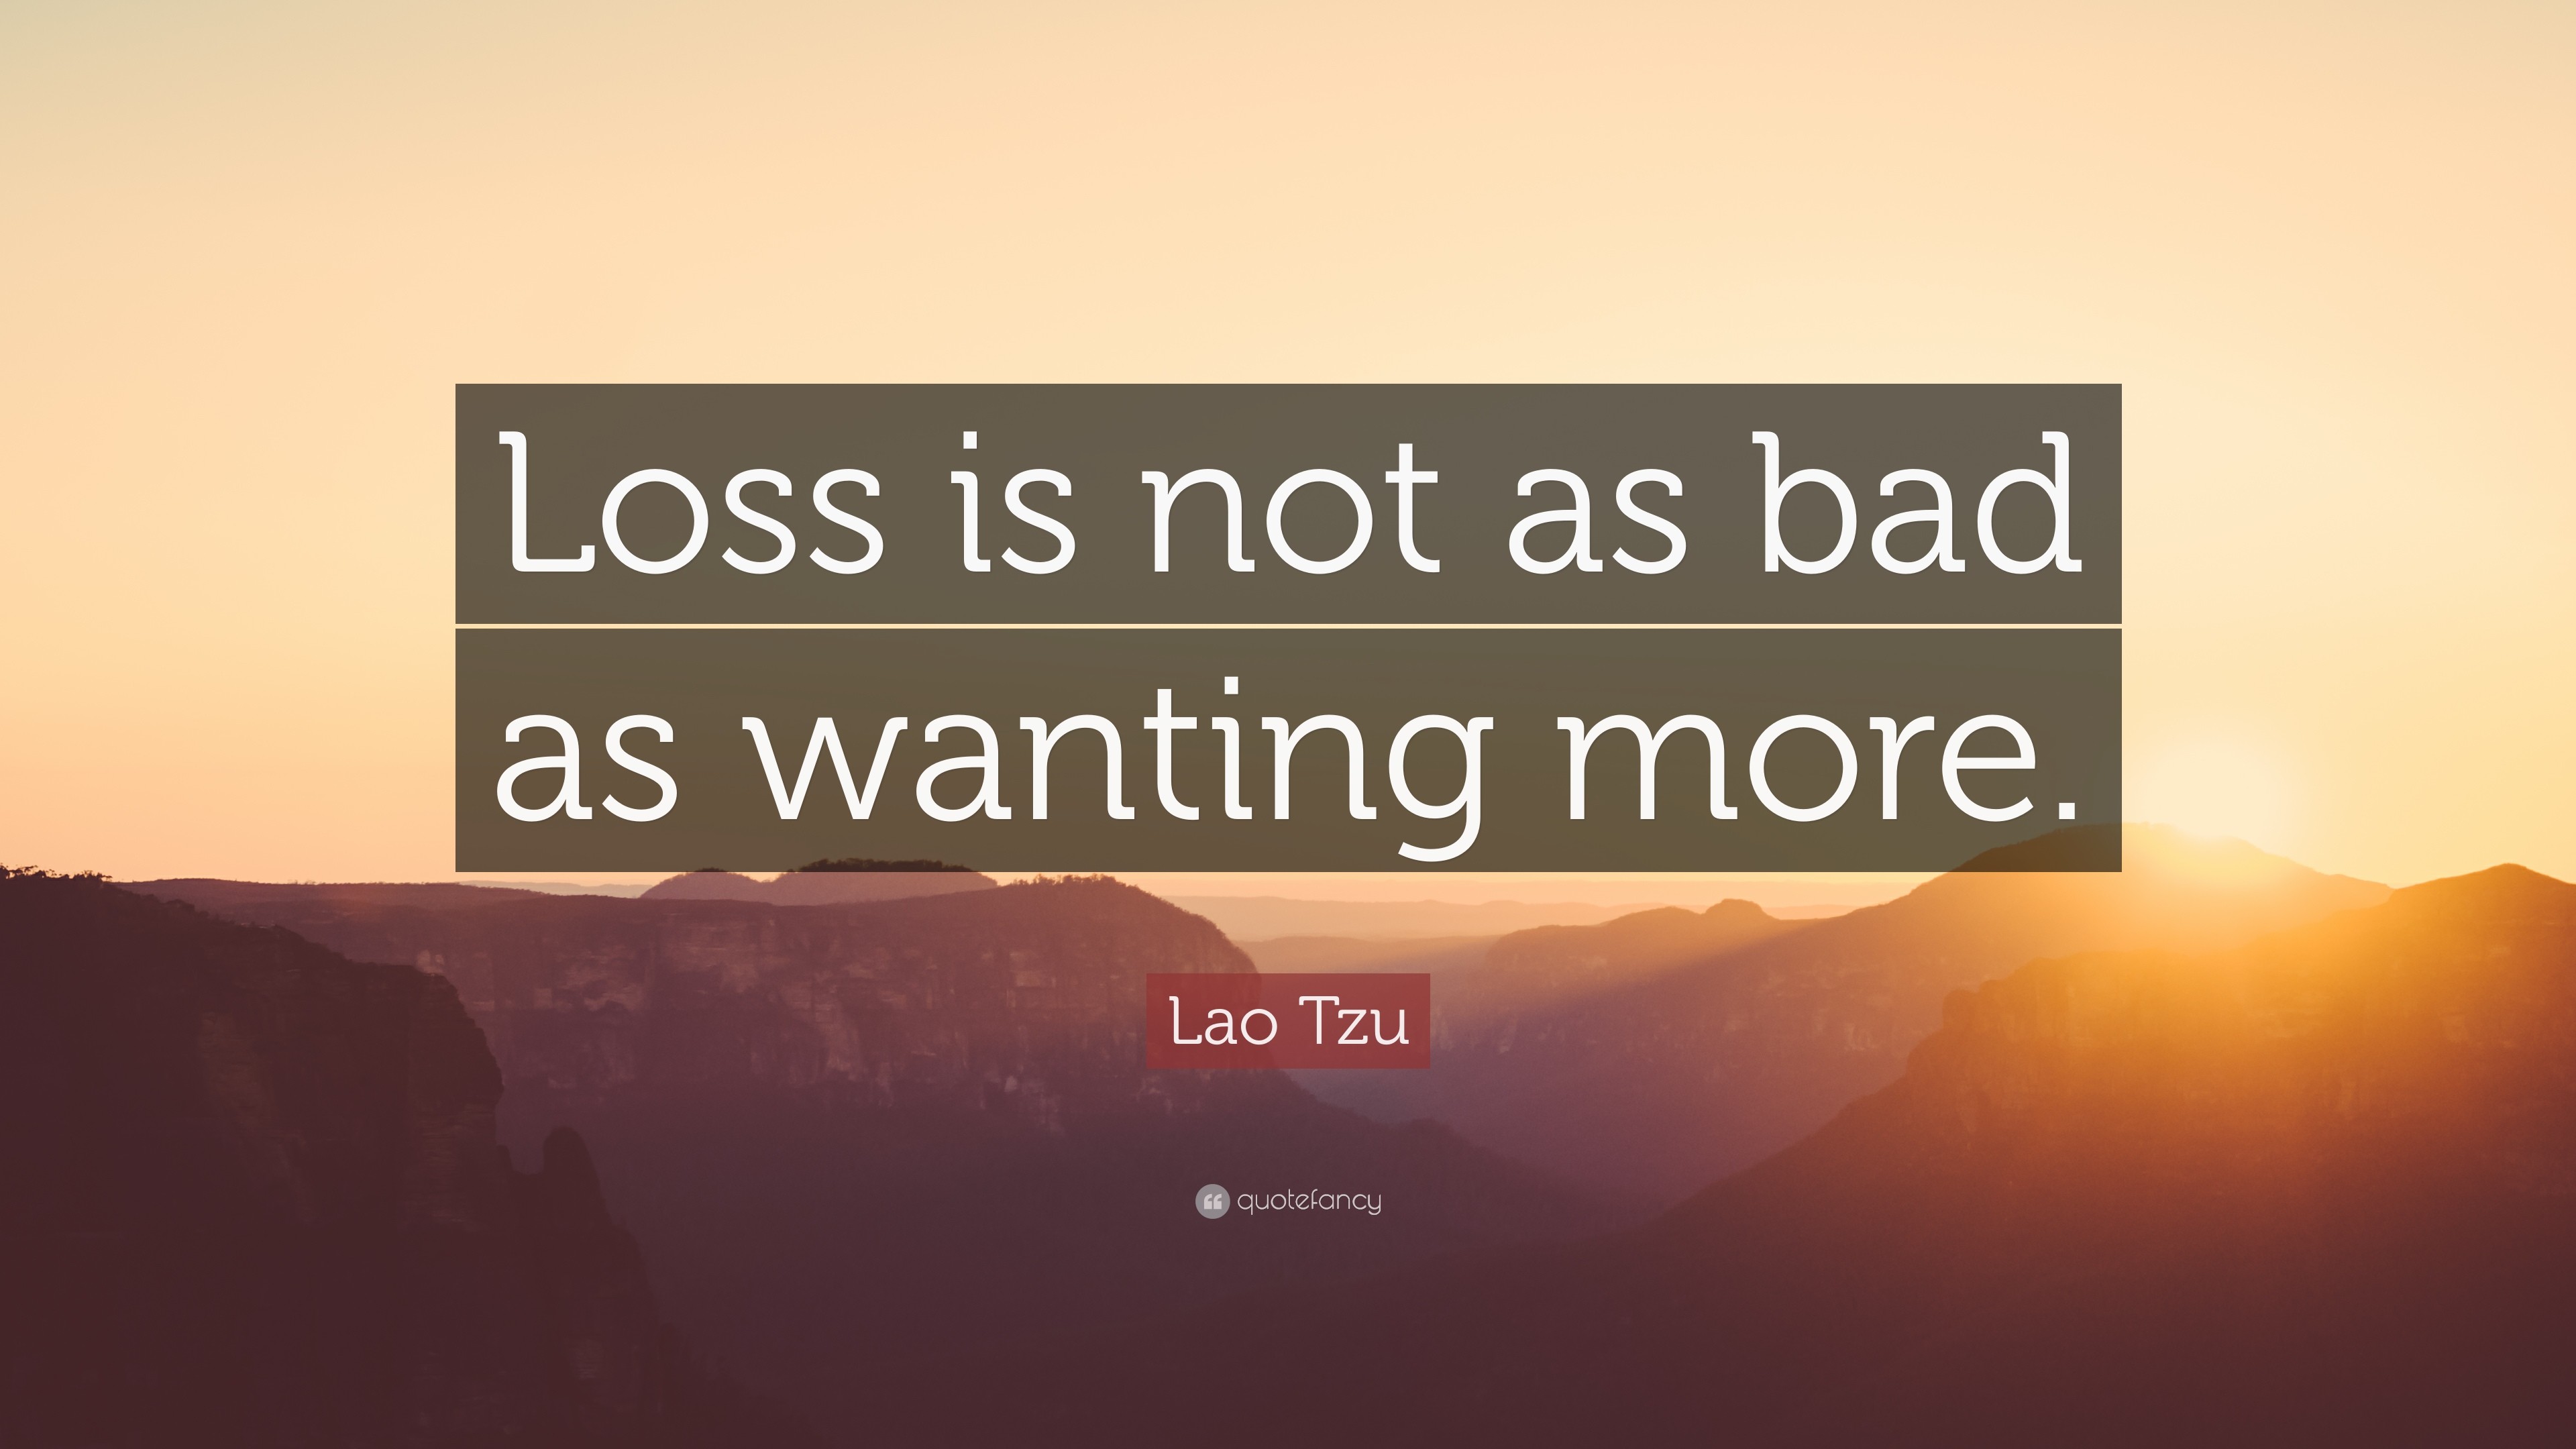 3840x2160 Lao Tzu Quote: “Loss is not as bad as wanting more.”